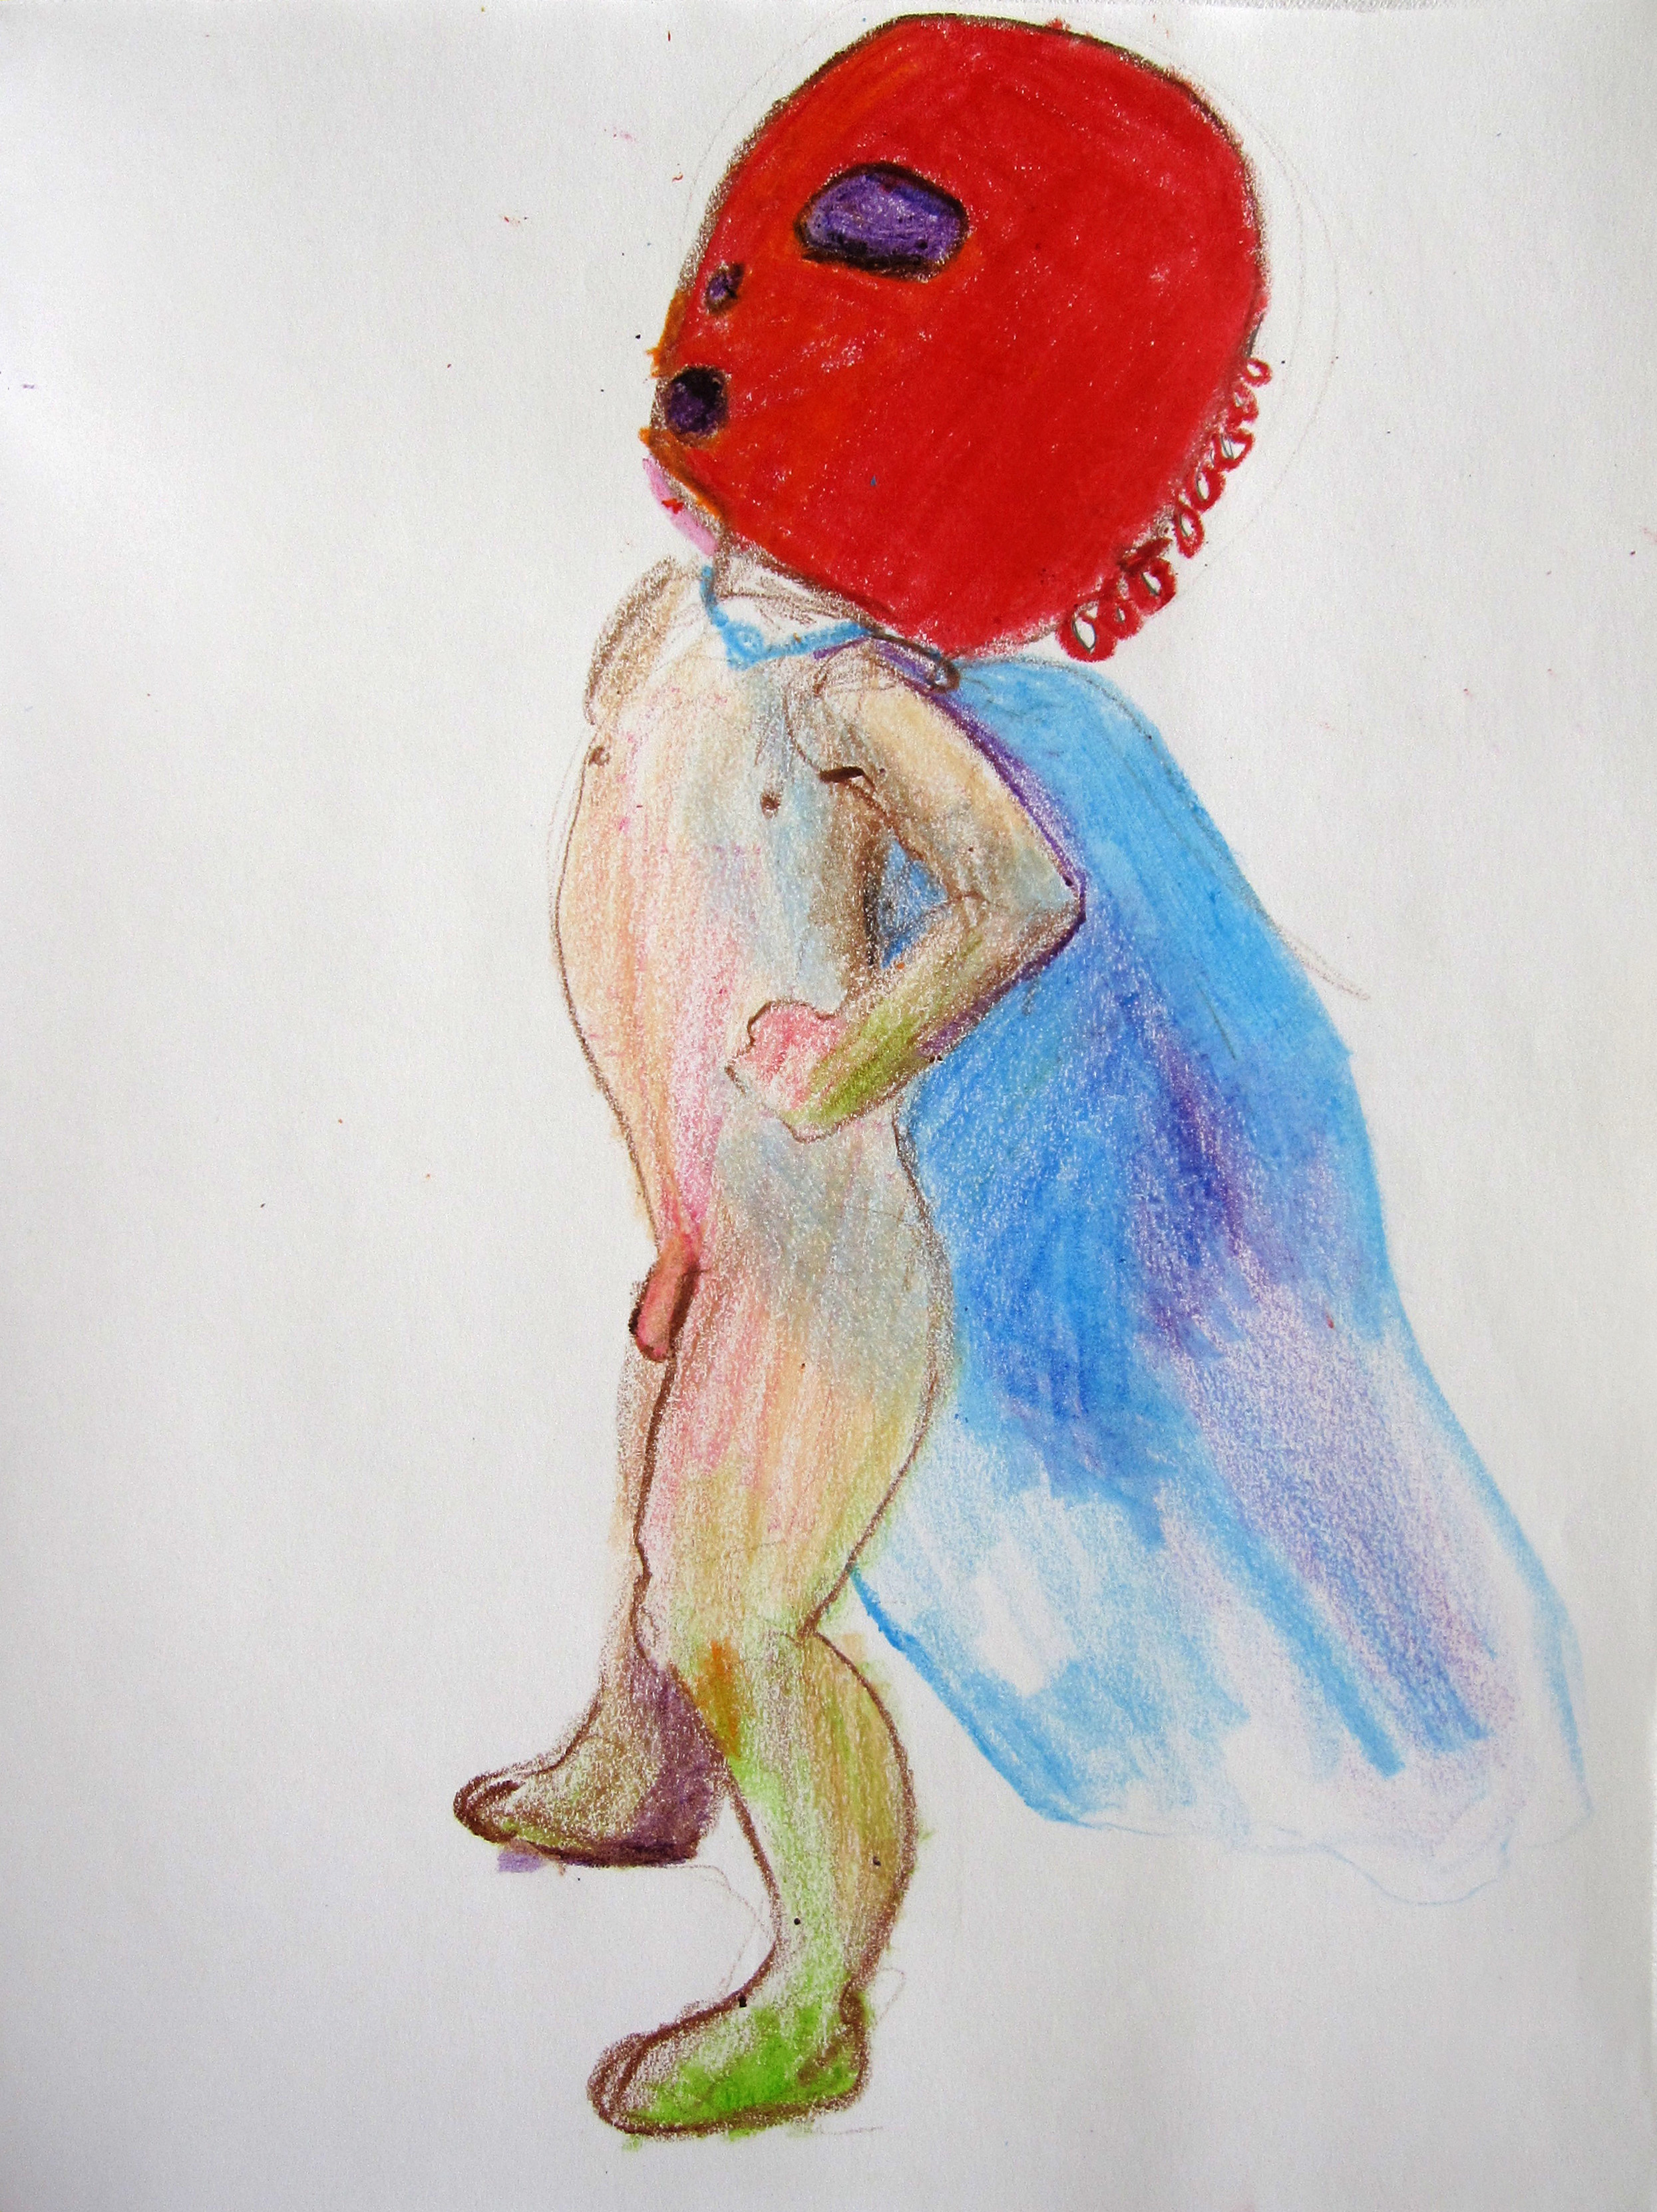 Lucha 3, 2008, Crayon on paper, 14 X11 in.